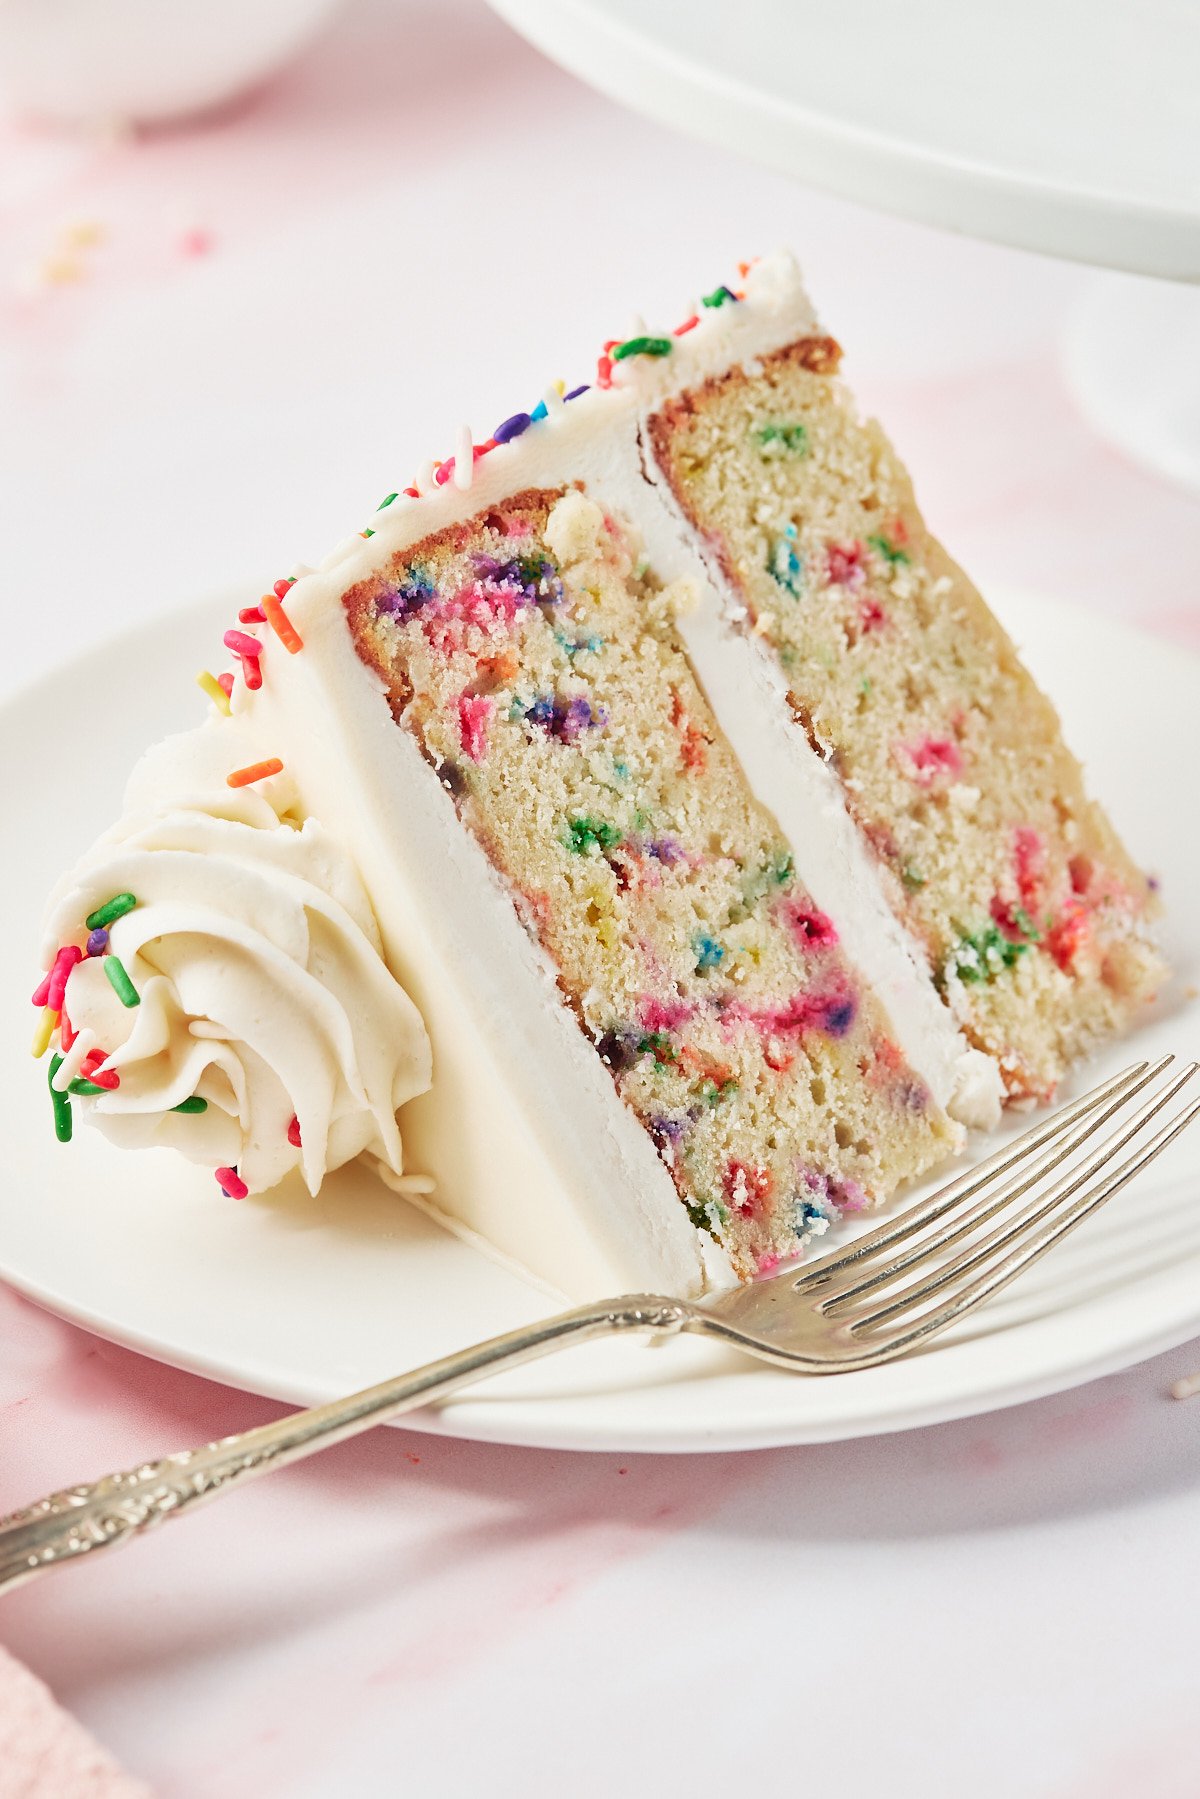 a slice of gluten-free funfetti cake on a white plate with a fork